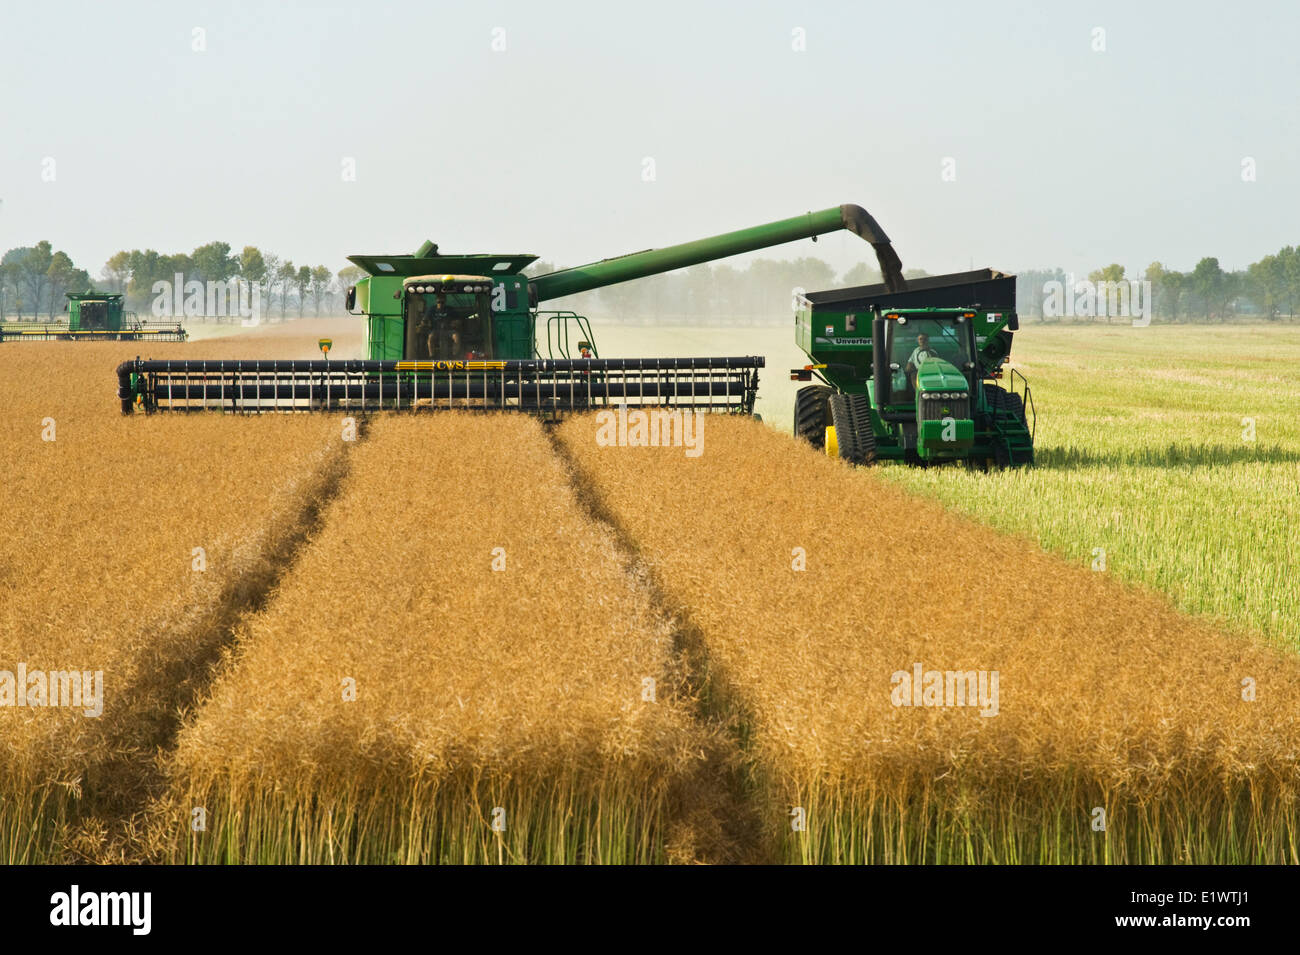 a combine harvester equipped with an air reel on the header, straight cuts standing canola while augering the crop into a grain Stock Photo